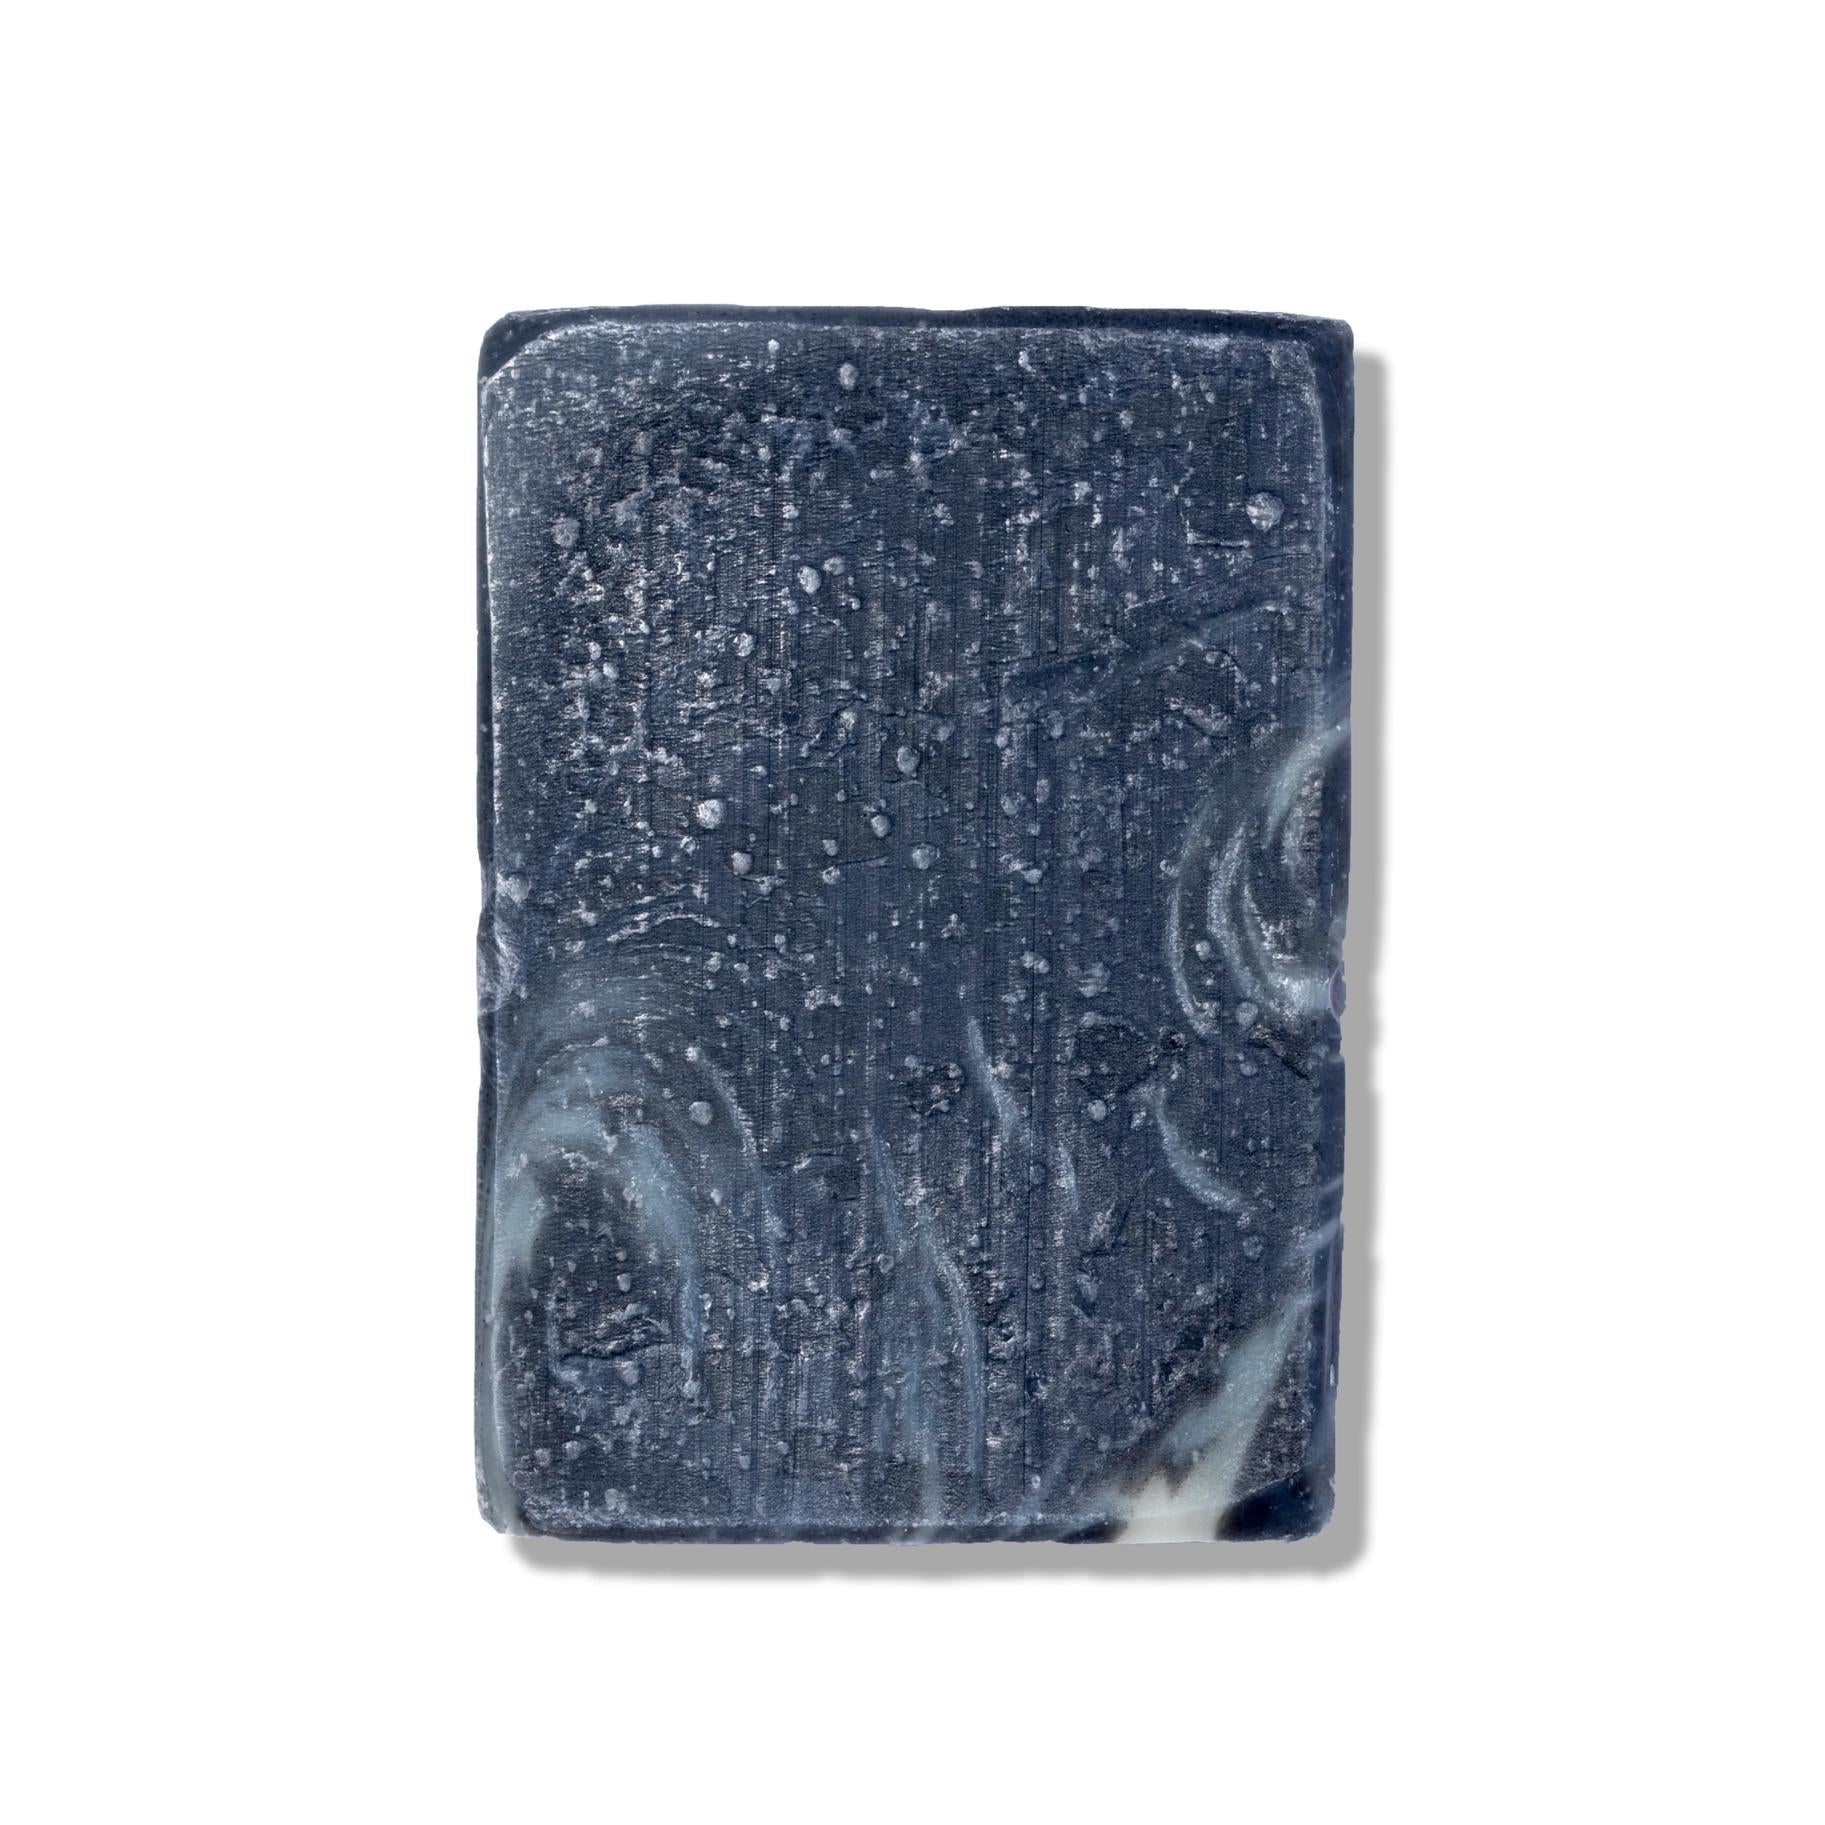 Charcoal Cleanse Face and Body Bar l Lavender Vanilla — 5.5oz